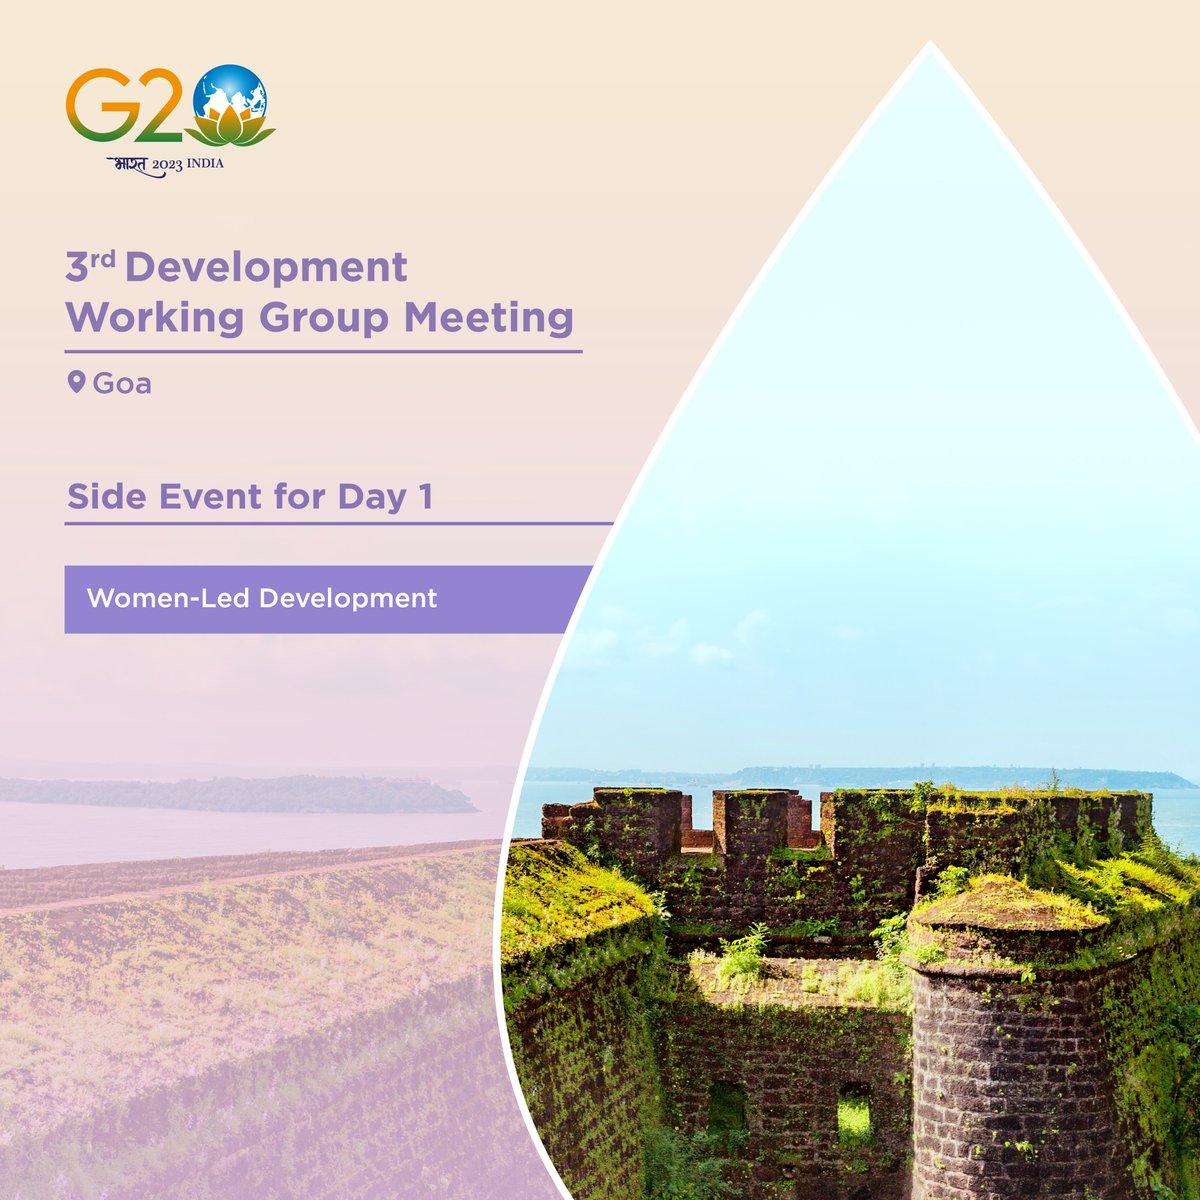 The 3⃣rd Development Working Group Meeting begins in #Goa! Day 1⃣ will kickstart with a side event on Women-Led Development.

Have a look at the agenda! 👇 #G20India #G20DWG